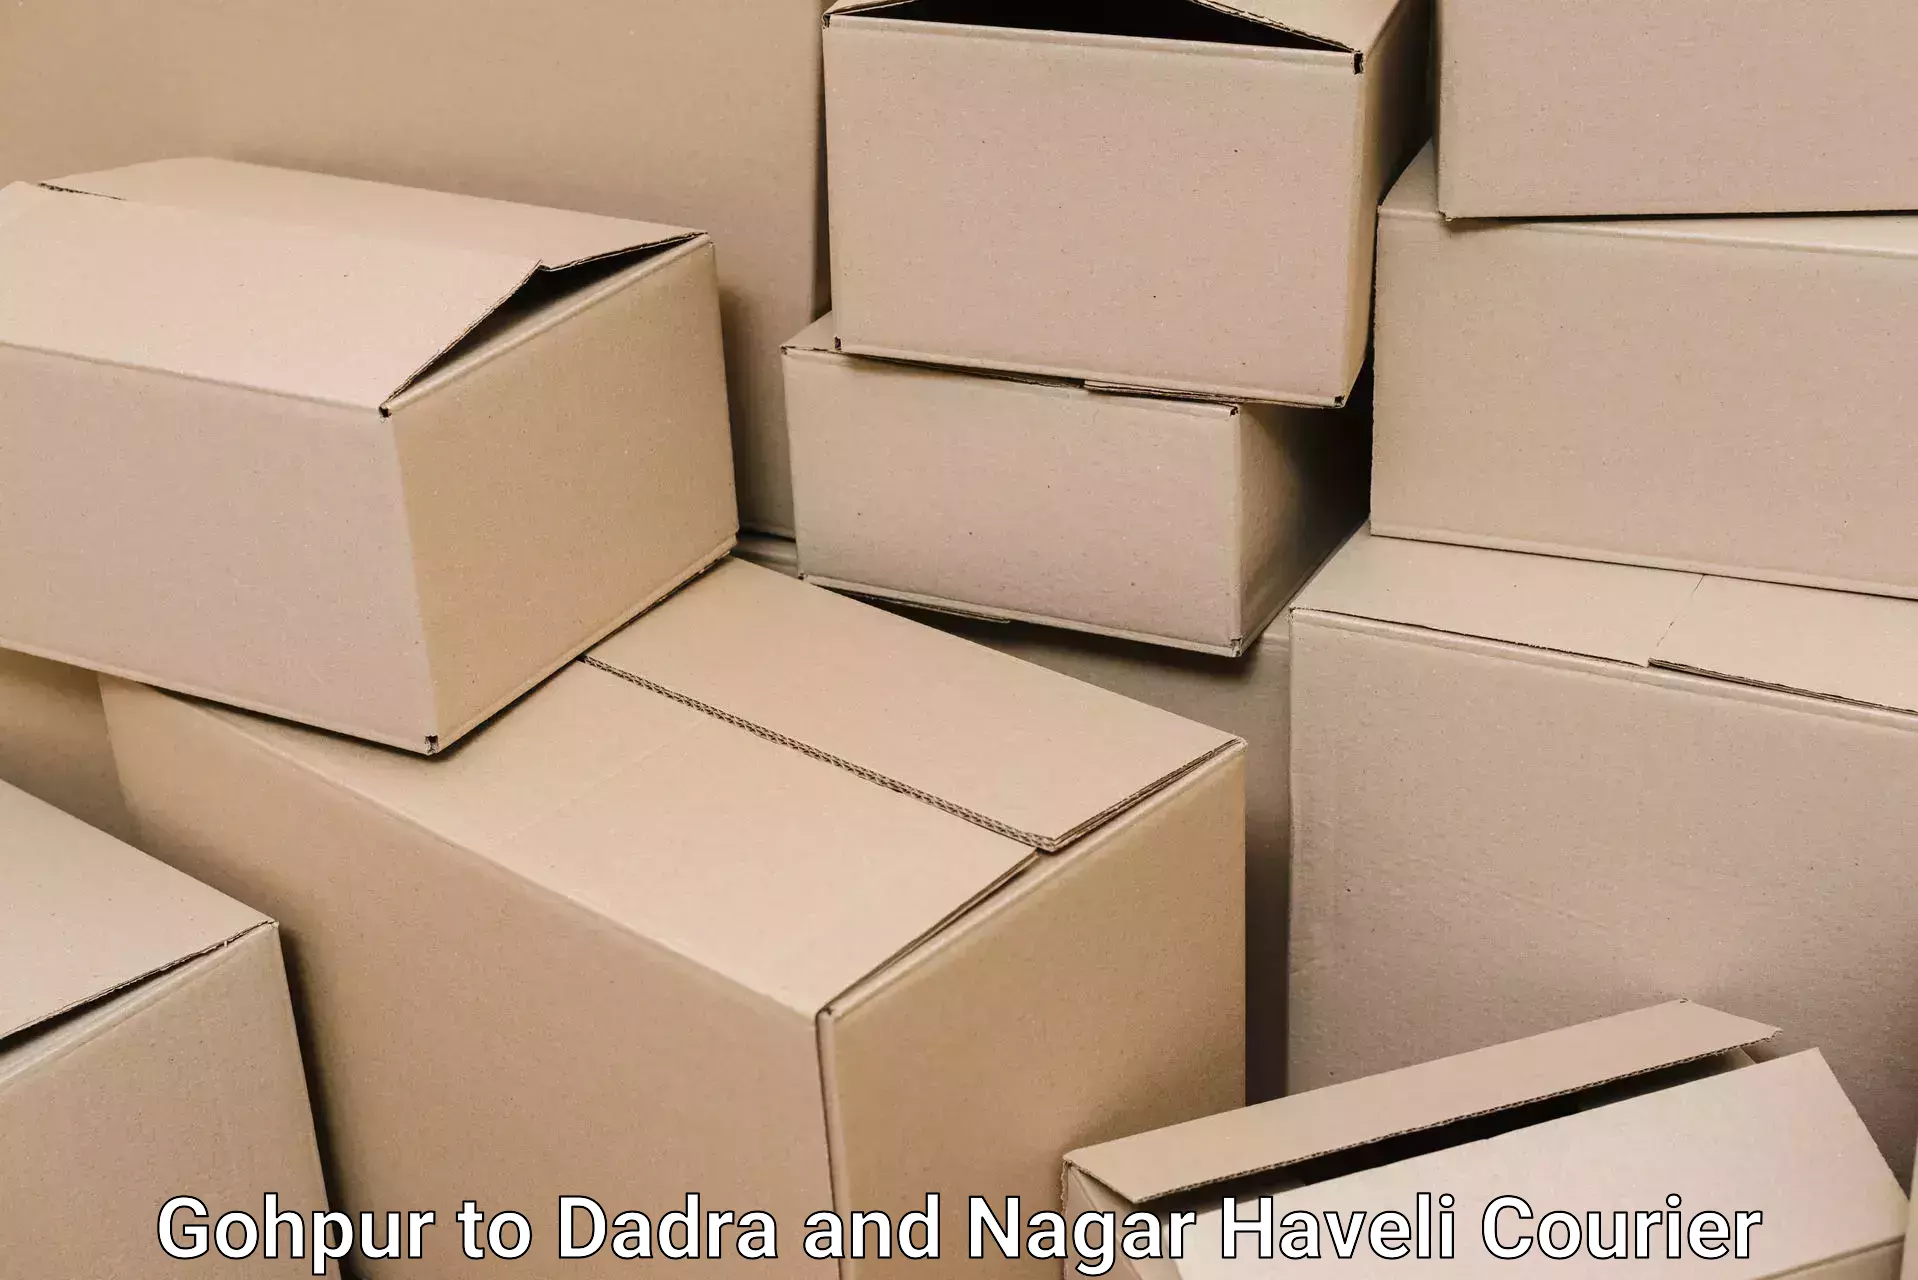 Moving and handling services Gohpur to Dadra and Nagar Haveli